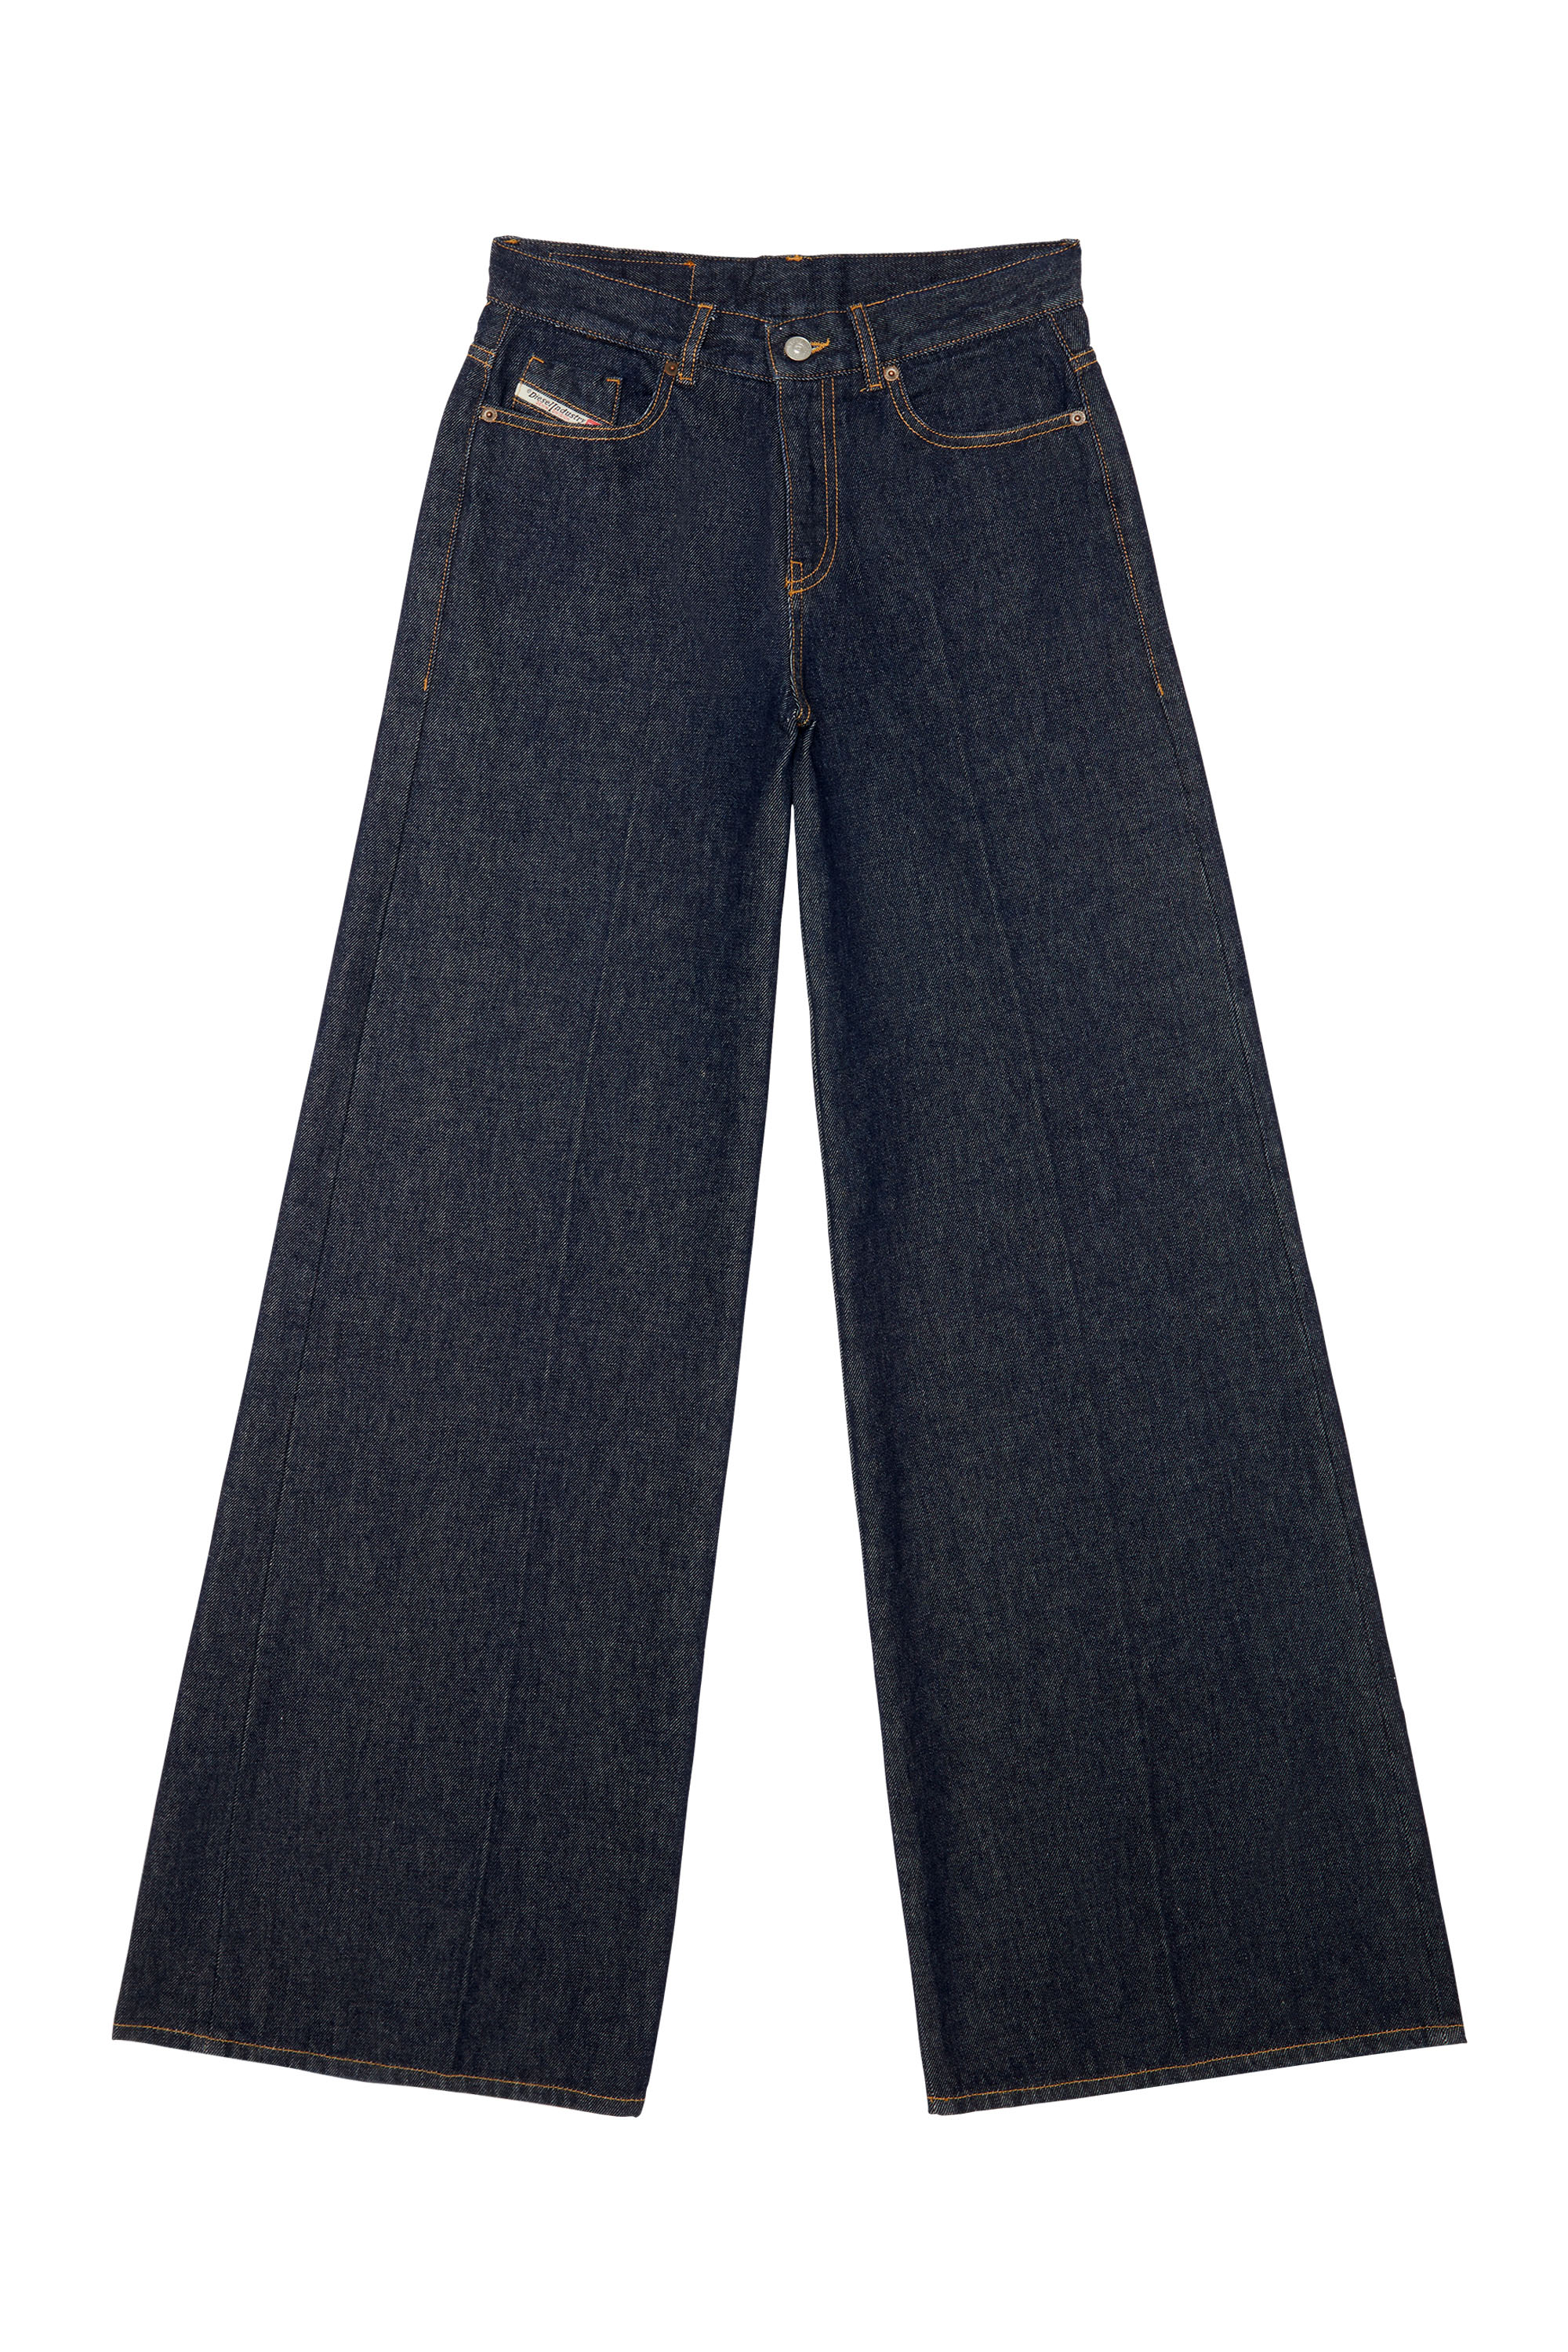 Bootcut and Flare Jeans 1978 D-Akemi Z9C02, Dark Blue - Jeans